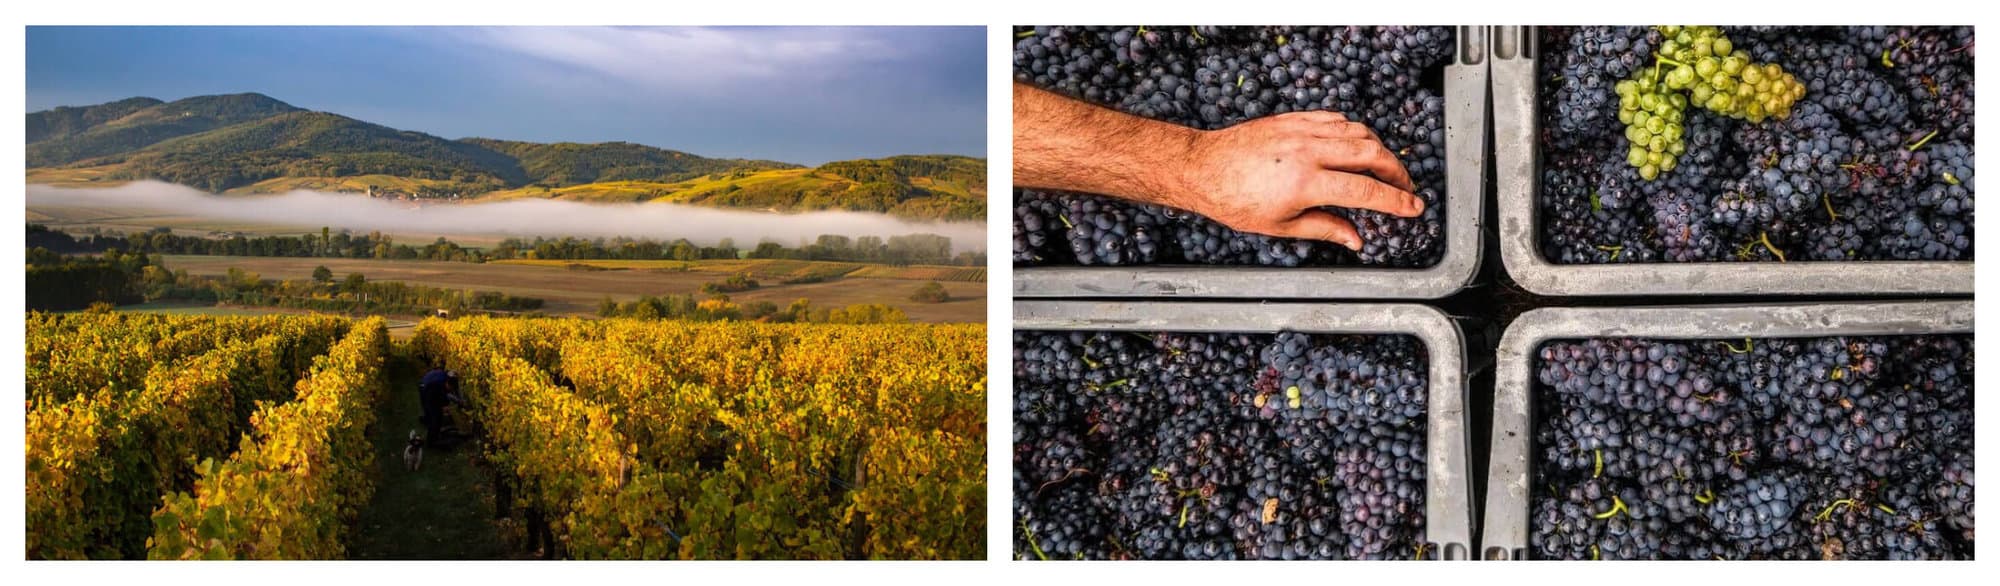 Left: A scenic vineyard with white clouds and green mountains. Right: A hand touches a harvest of black grapes for harvest.